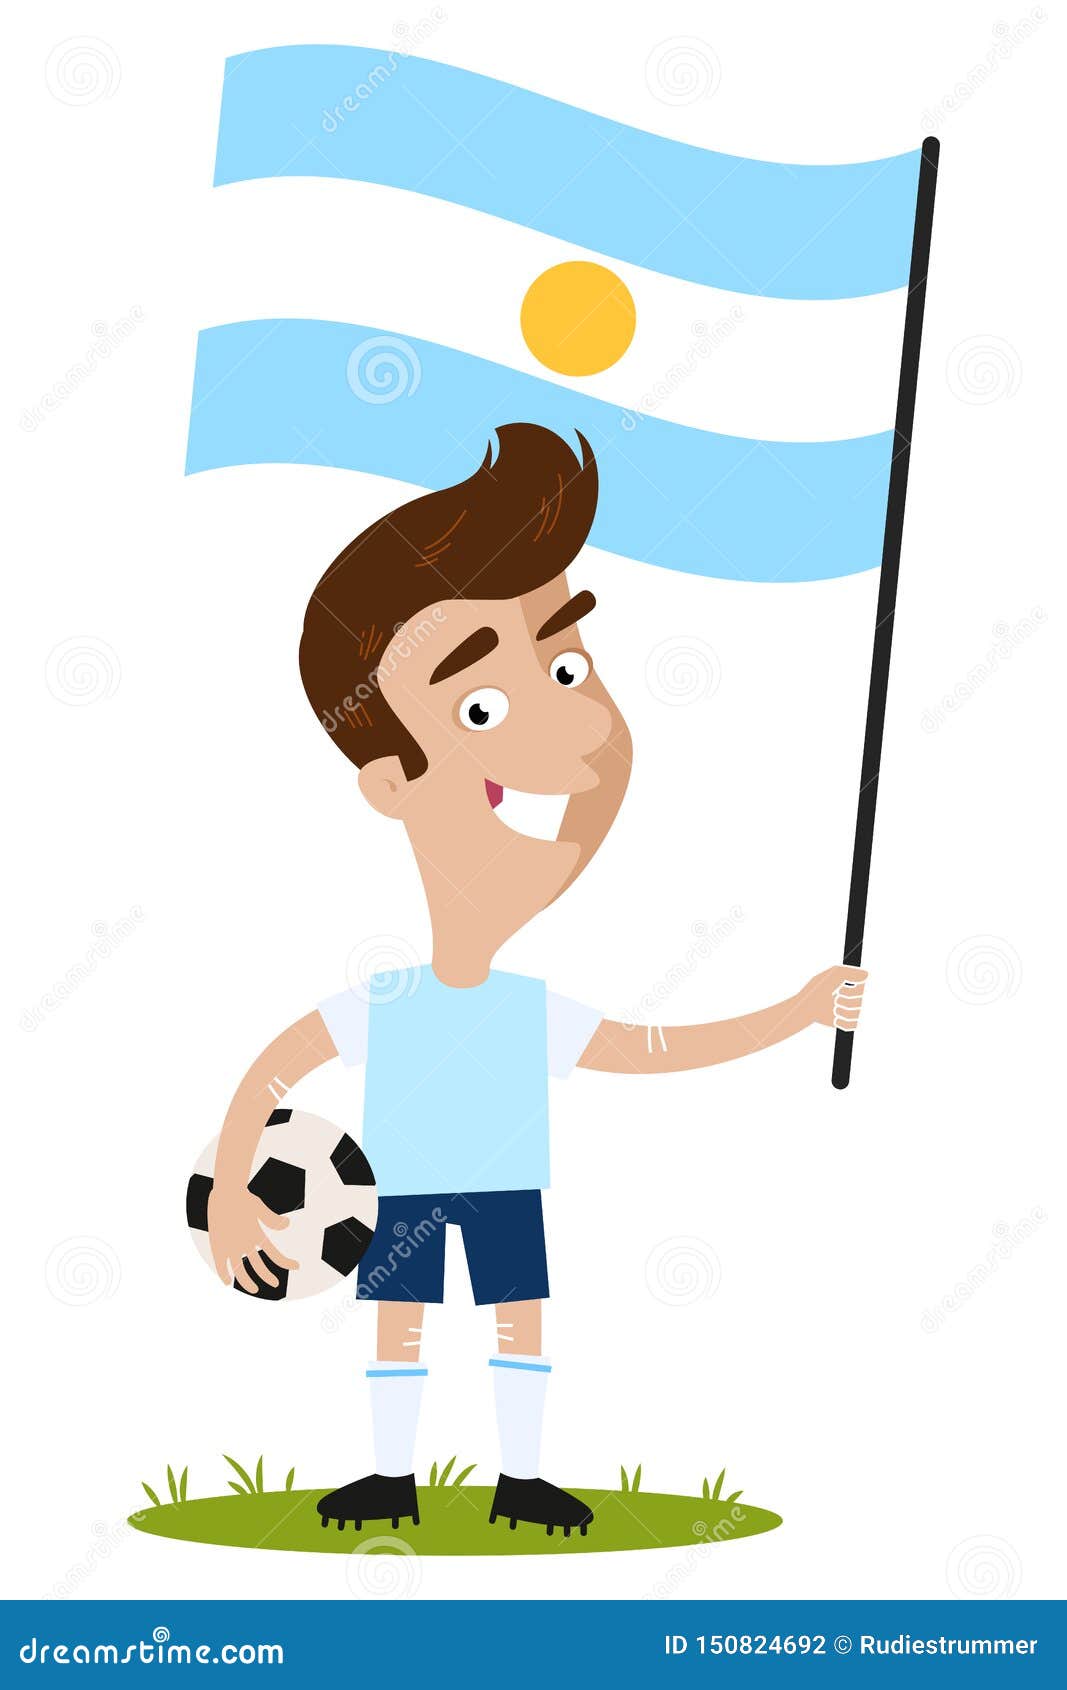 Football Player For Argentina, Cartoon Man Holding Argentinian Flag